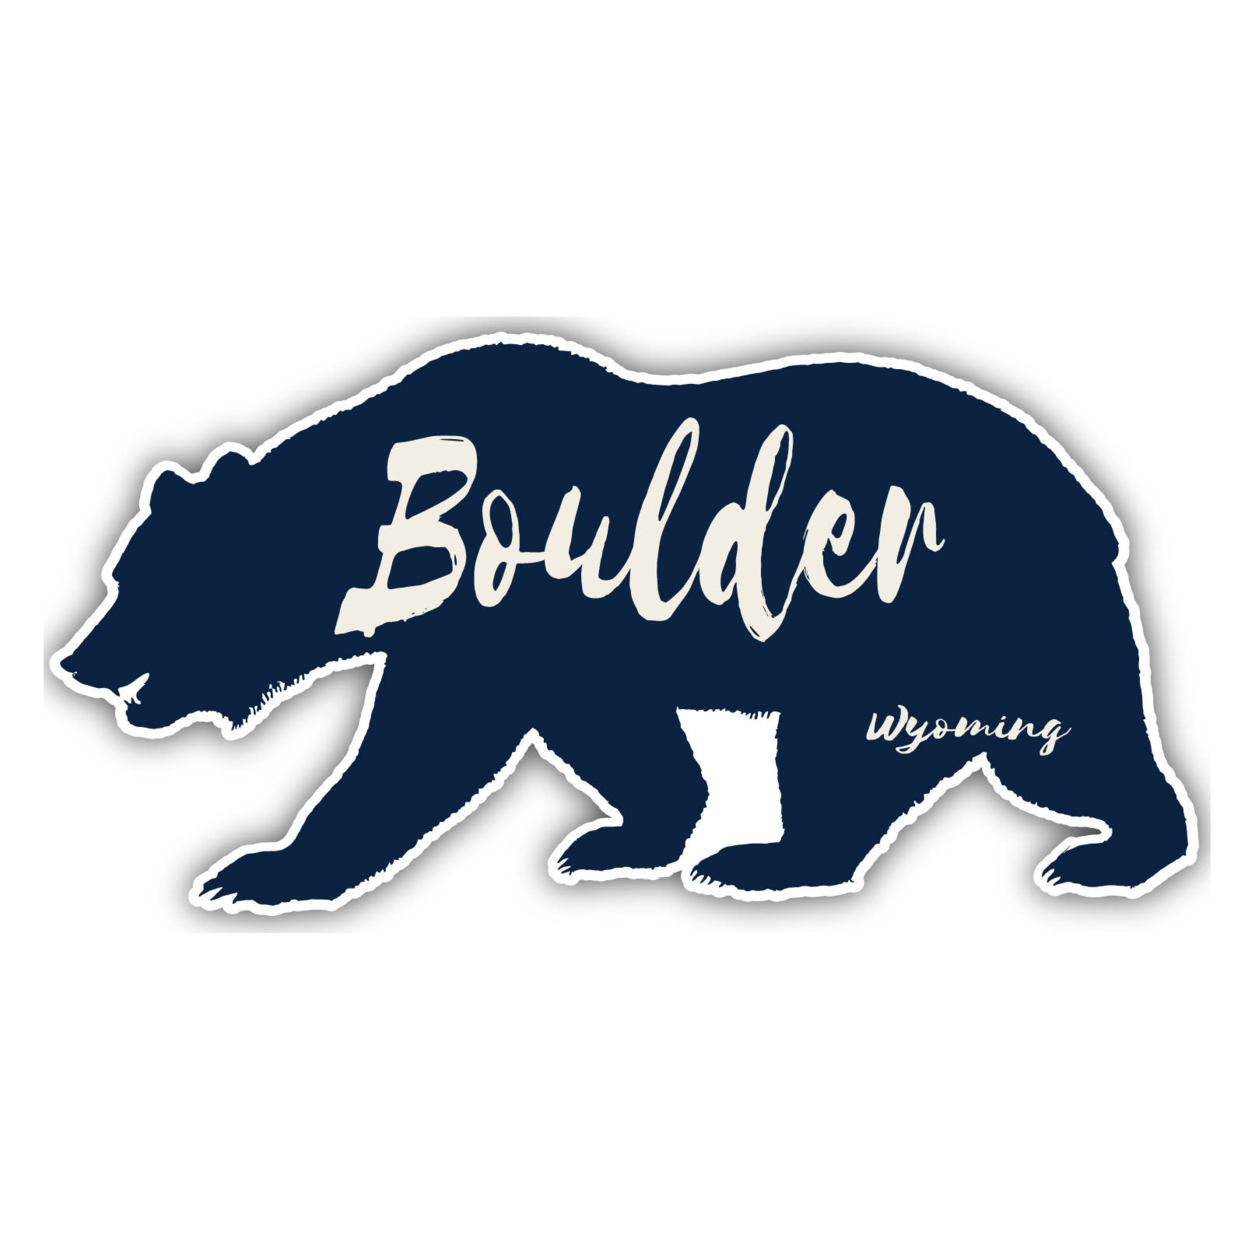 Boulder Wyoming Souvenir Decorative Stickers (Choose Theme And Size) - 4-Pack, 8-Inch, Bear